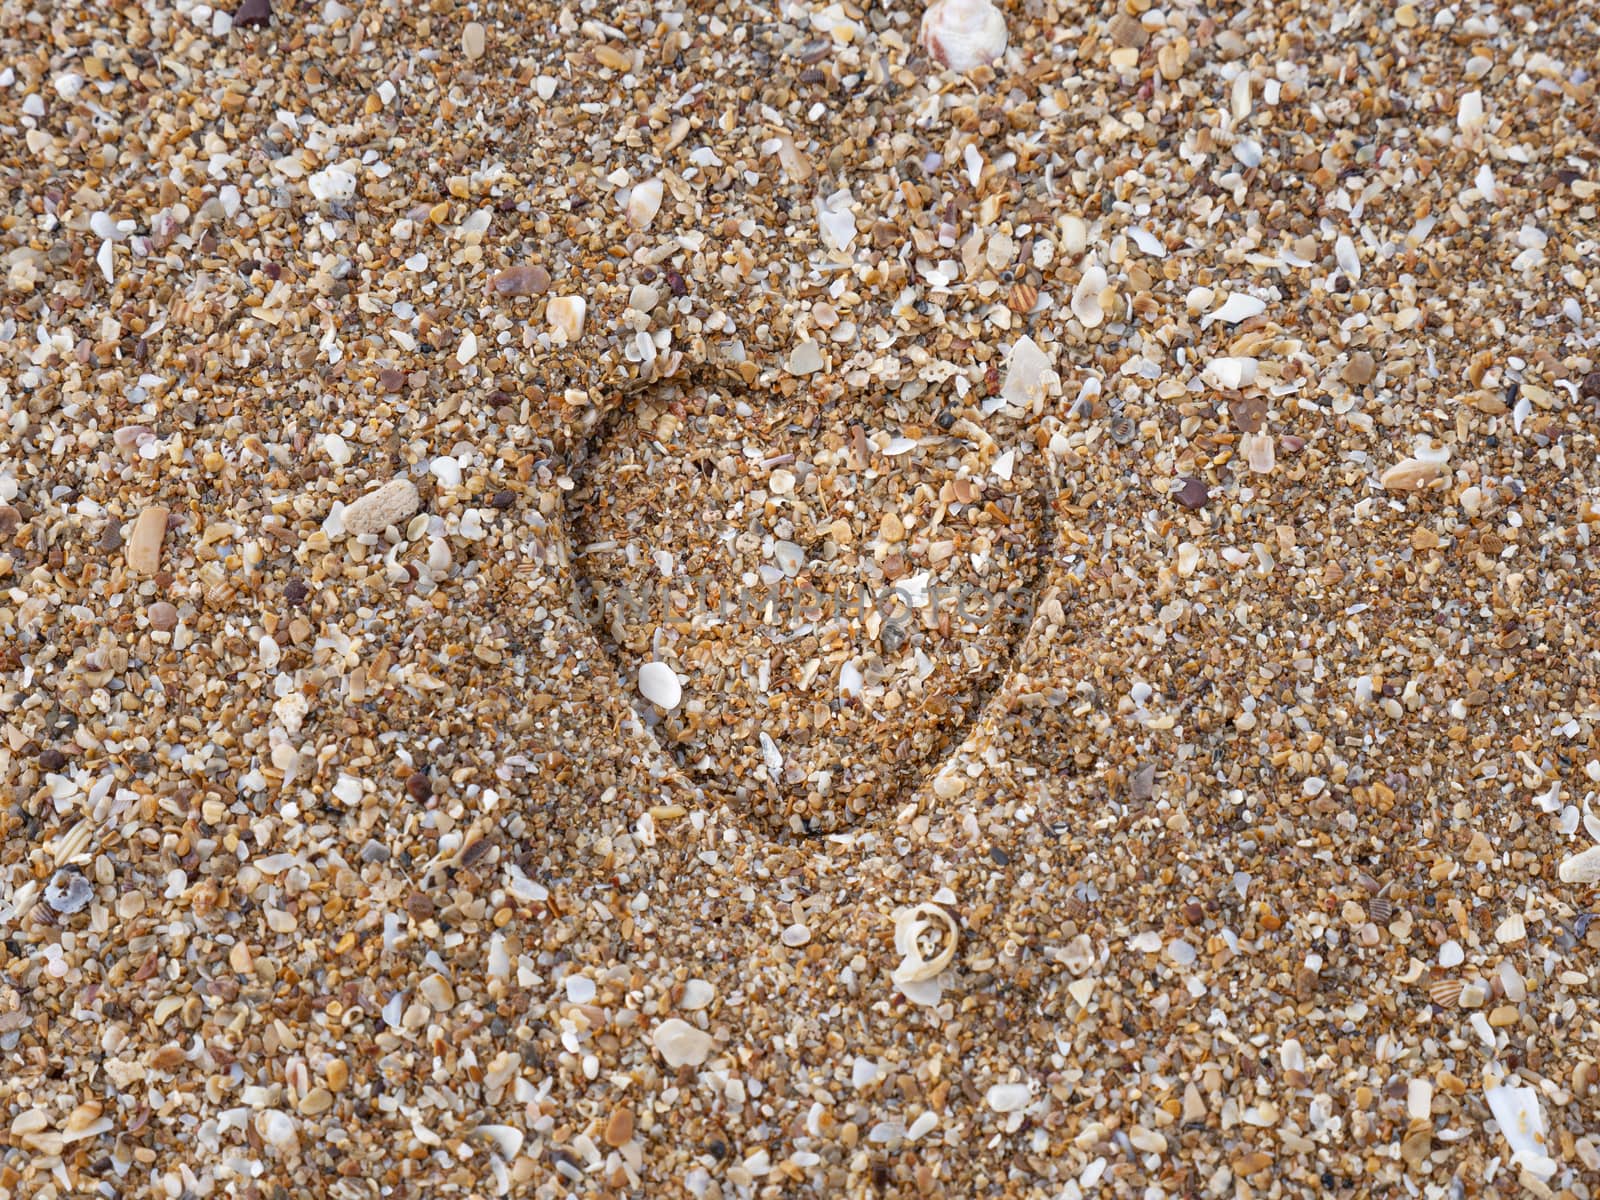 Heart impression on a sand by Nawoot